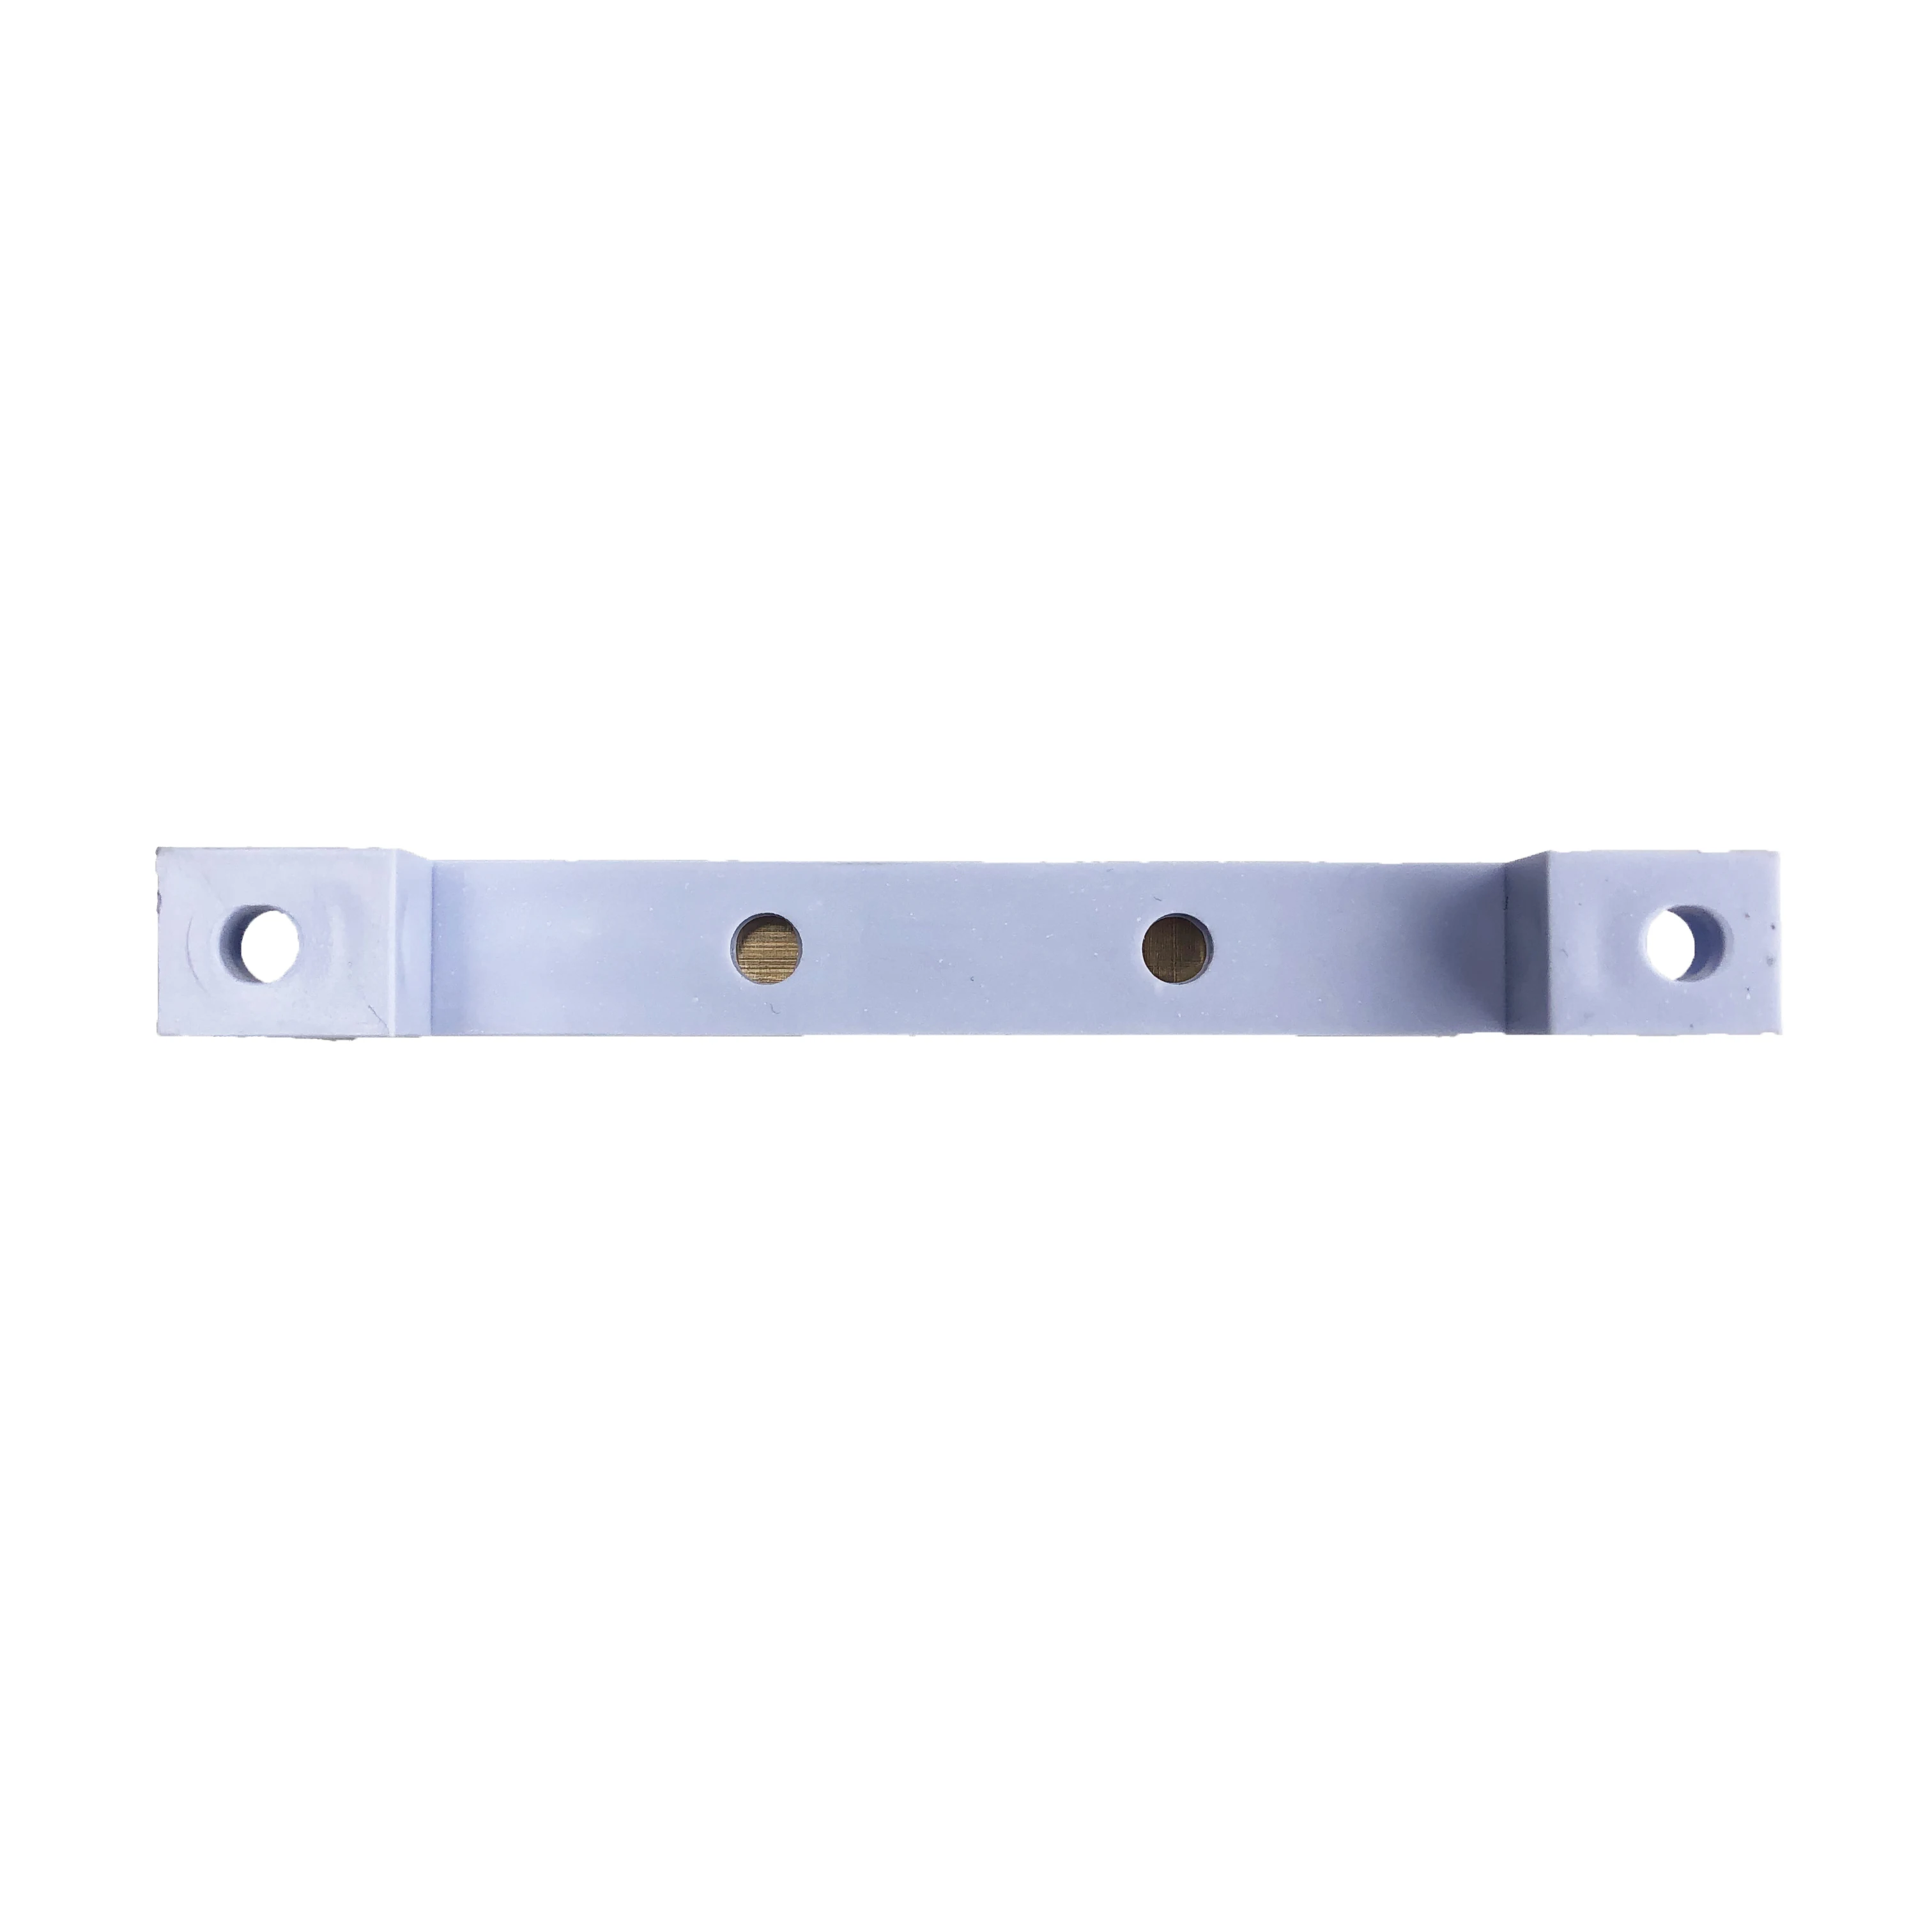 Factory Price Purple White All Plastic Copper Neutral Screw Bar Terminal Blocks For Junction Cabinets